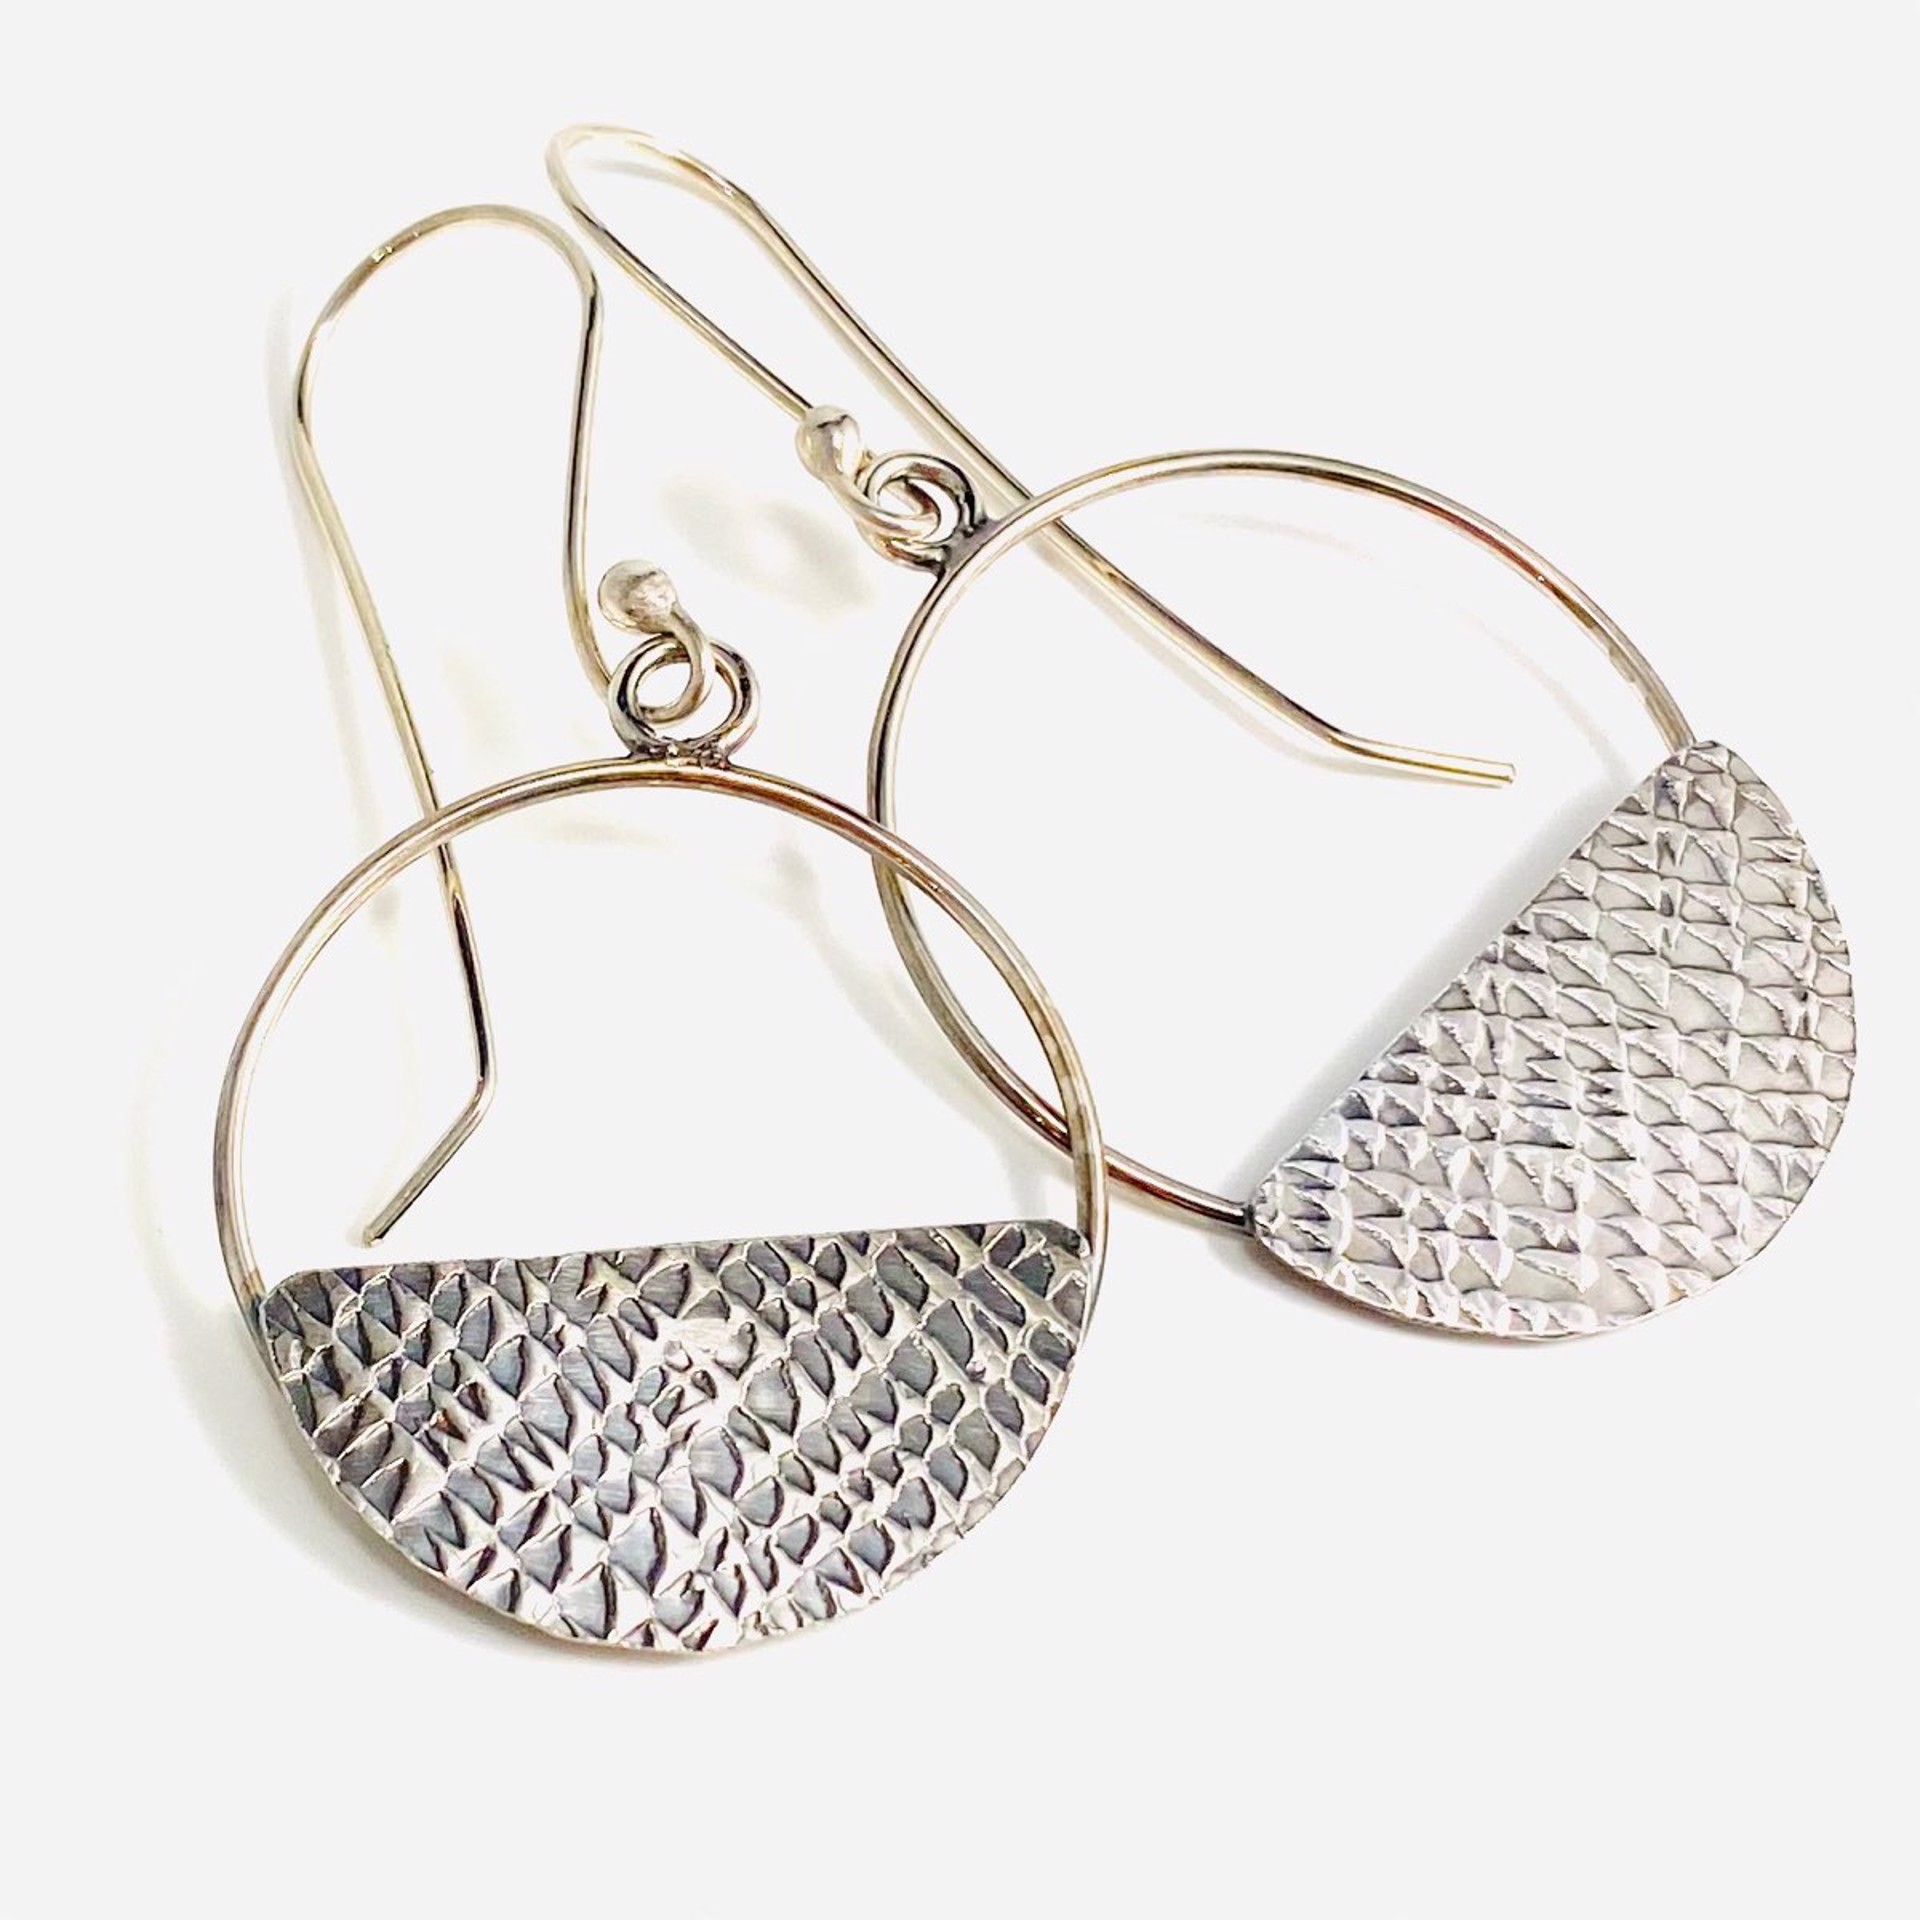 Basket Weave Circle Earrings by Anne Bivens